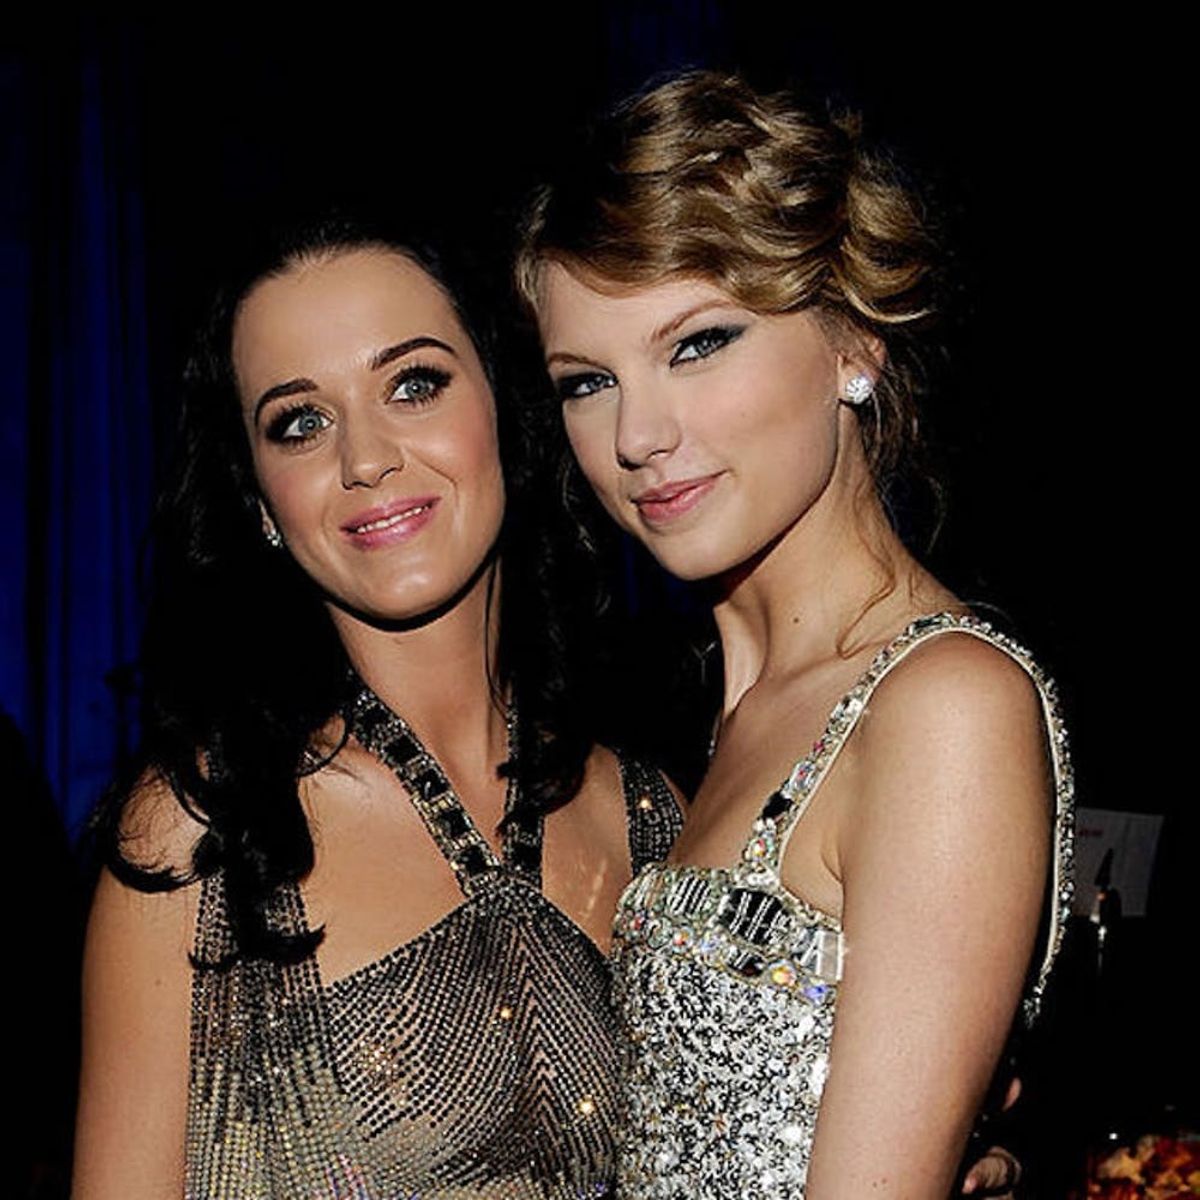 Morning Buzz! Taylor Swift Put ALL of Her Music Online at the Same Time As Katy Perry’s New Album + More